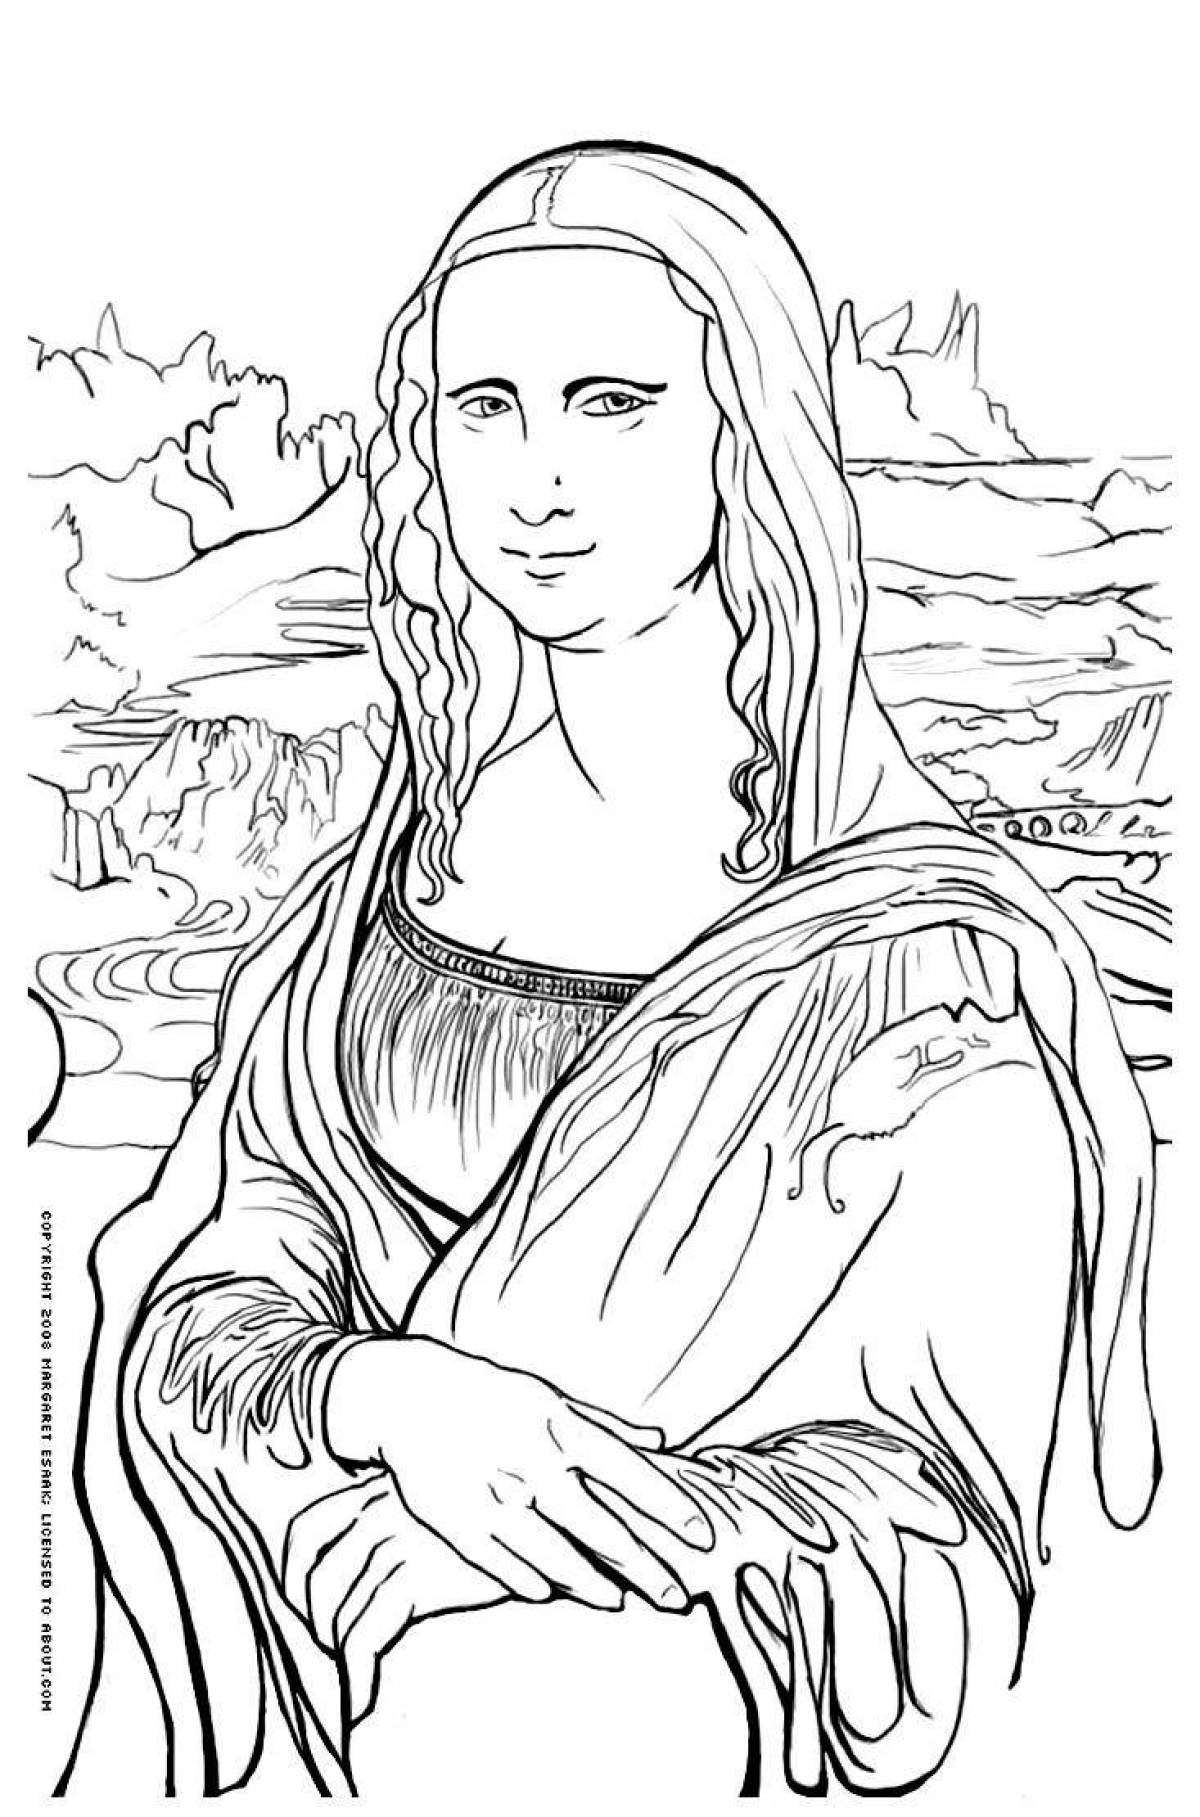 Exquisite coloring page